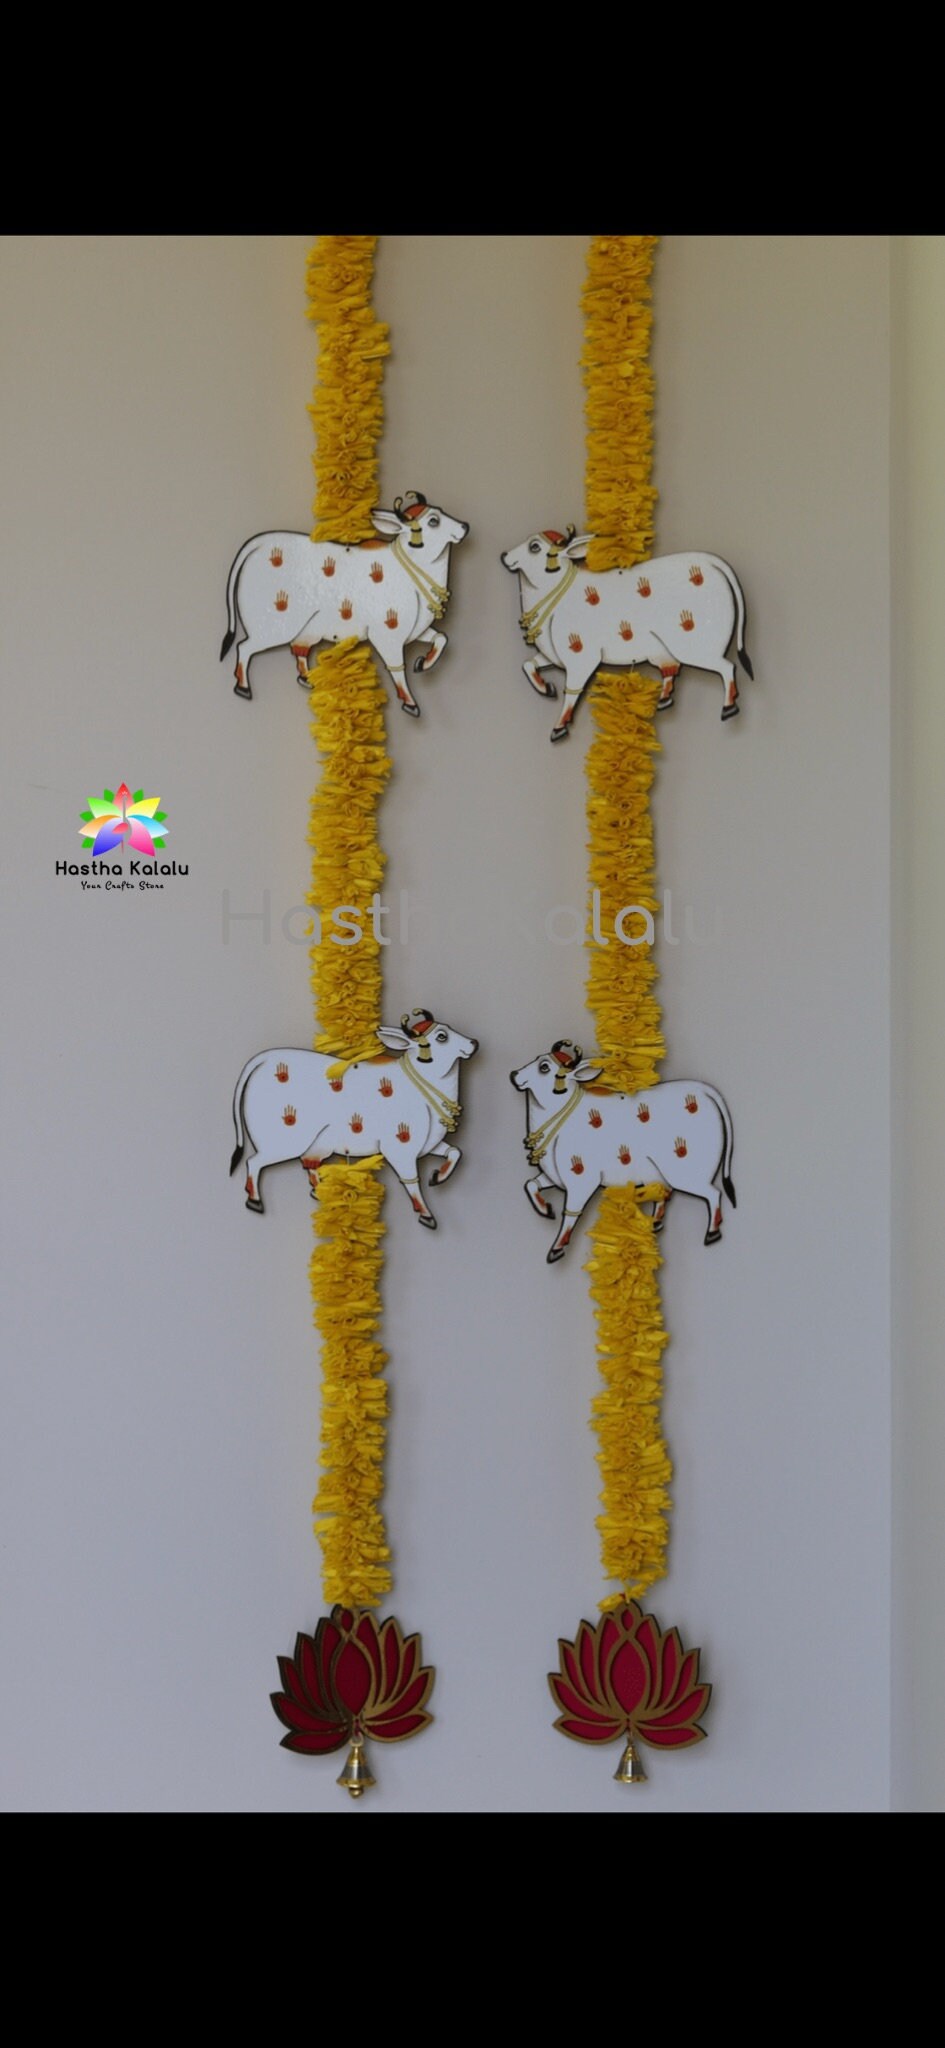 Solawood garlands/event decoration material